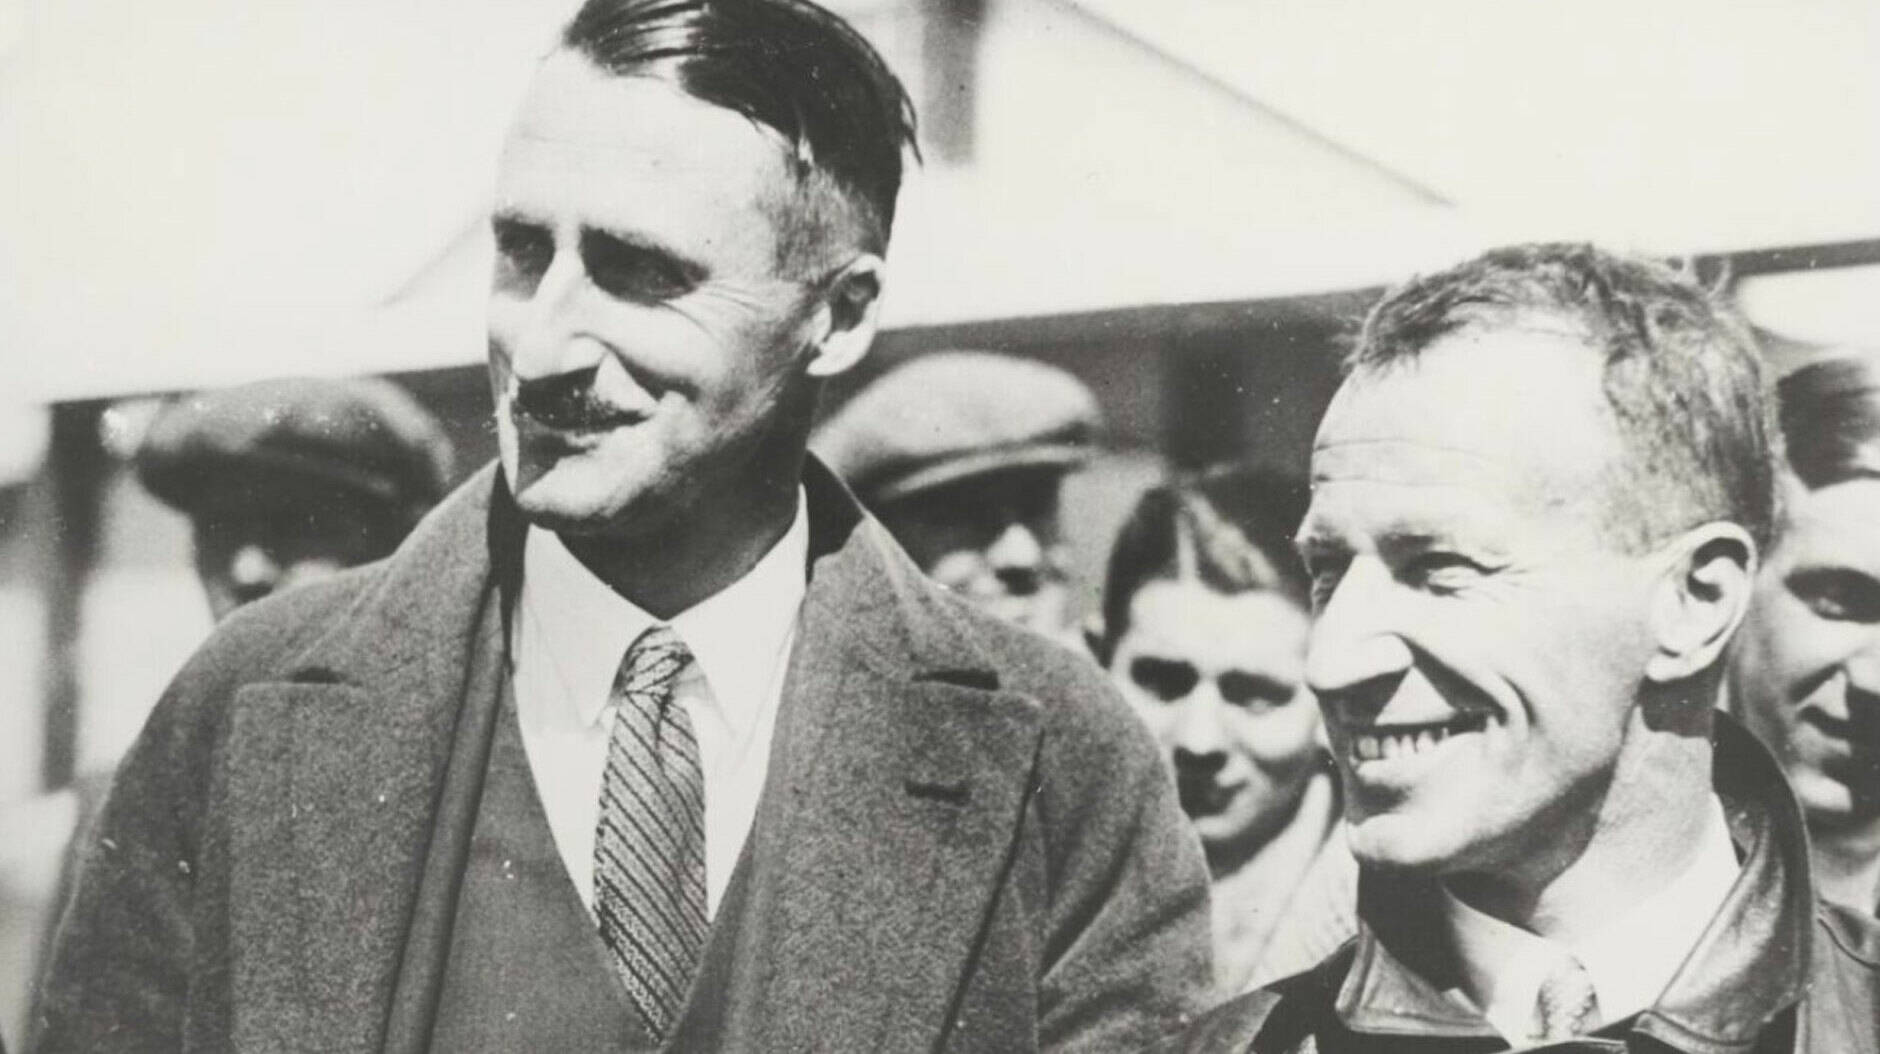 Image Photo Captain Fred Haig, Vaccum Oil's first Aviation Manager in Australia with pioneer aviator Charles Kingsford Smith.